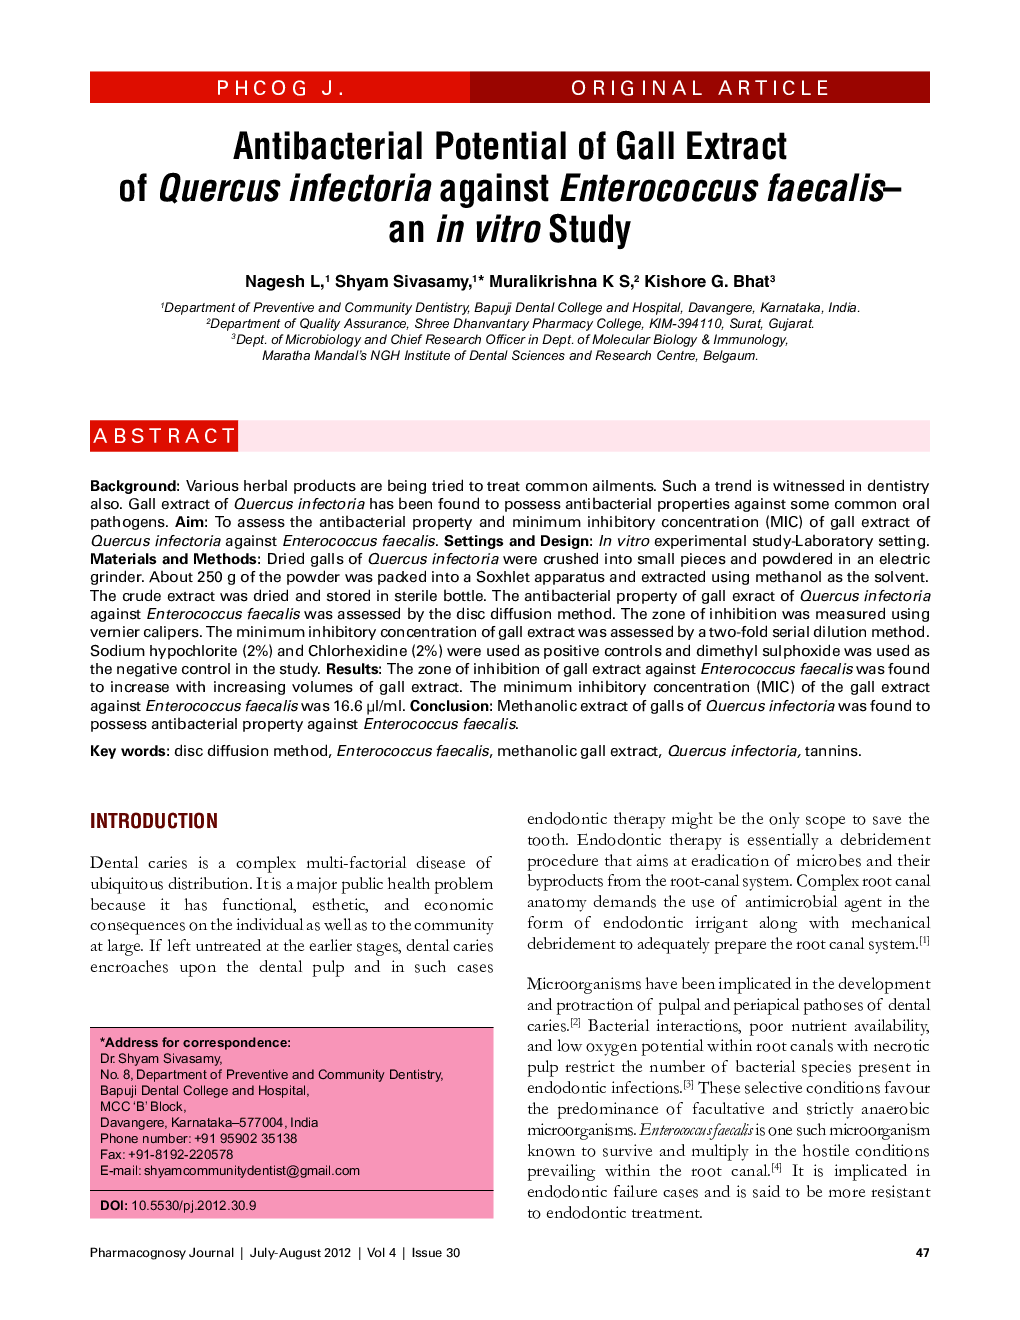 Antibacterial Potential of Gall Extract of Quercus infectoria against Enterococcus faecalis-an in vitro Study